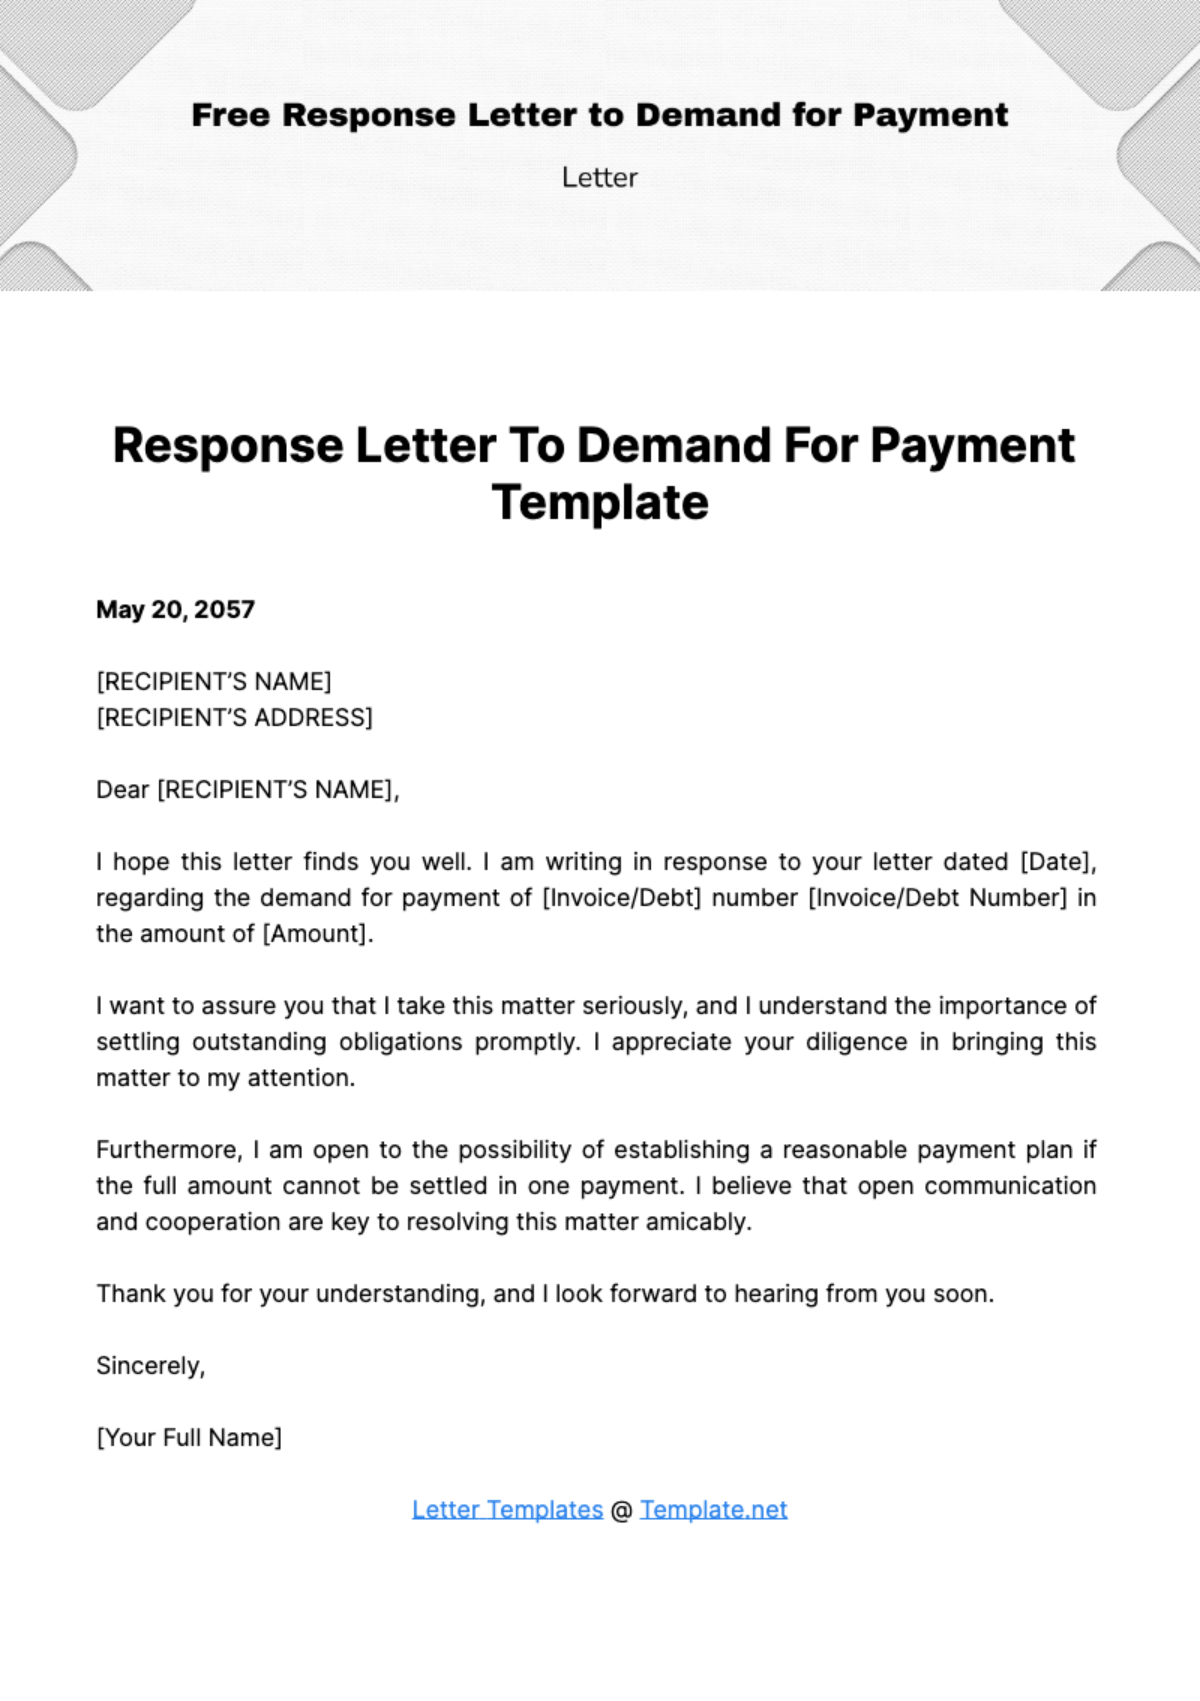 Free Response Letter to Demand for Payment Template